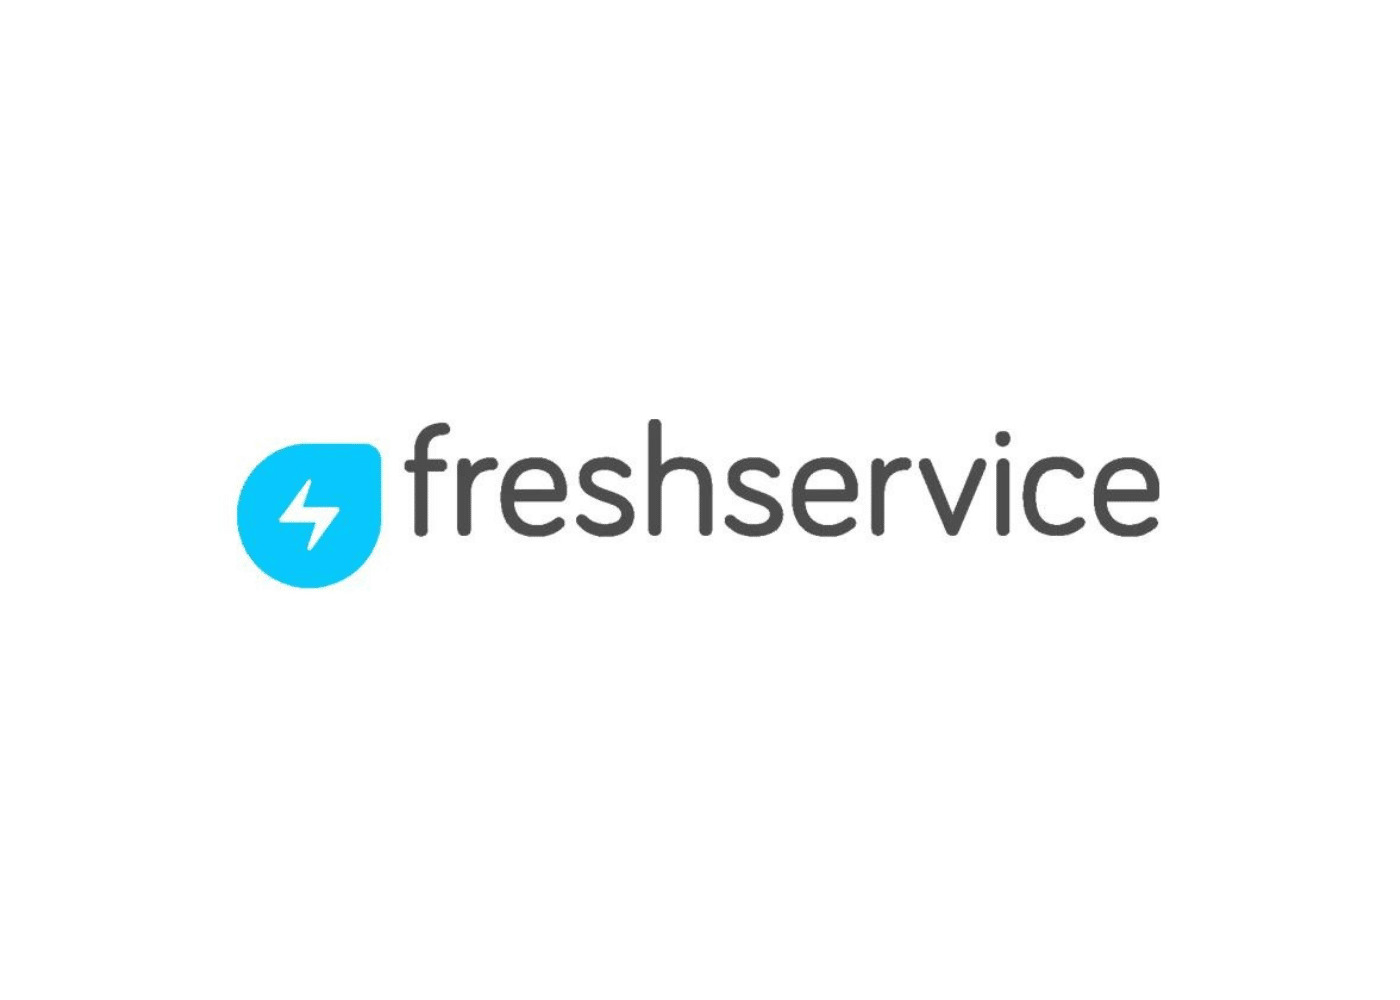 20-facts-about-freshservice